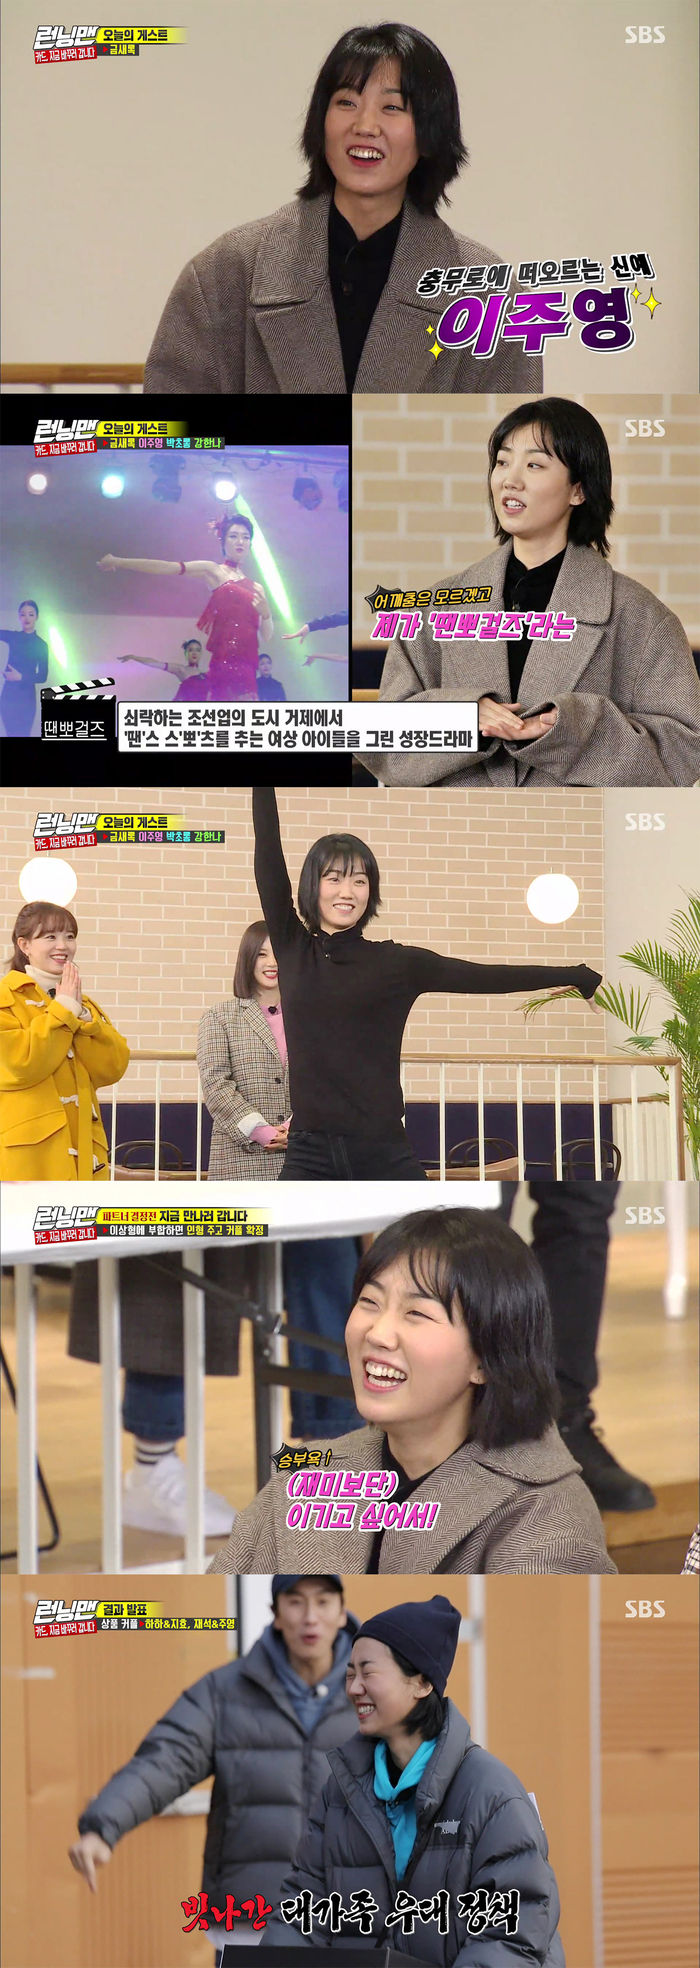 Actor Lee Ju-young appeared on Running Man and showed off his charm.SBS Running Man, which was broadcasted on the 19th, was a hot expectation for 2020, including Lee Ju-young, Actor Kang, Kim Sang-rok, and A Pink Park Chan-long as guests.Lee Ju-young, who first appeared in Running Man with the introduction of Kim Sang-rok as a close friend, expressed his strong confidence that he would show Cha Cha-cha that he learned through the dance sports drama Once Po.However, unlike everyones expectations, he laughed at the stiff dance and kicking, which seemed to see the broken marionette, listening to the words Is not the wooden doll dancing?Lee Ju-young was defeated by Kim Jong-guk and Lee Kwang-soo in a row in the subsequent partner match, but showed the persistence of the wildness and excitement of robbing Yoo Jae-Suks dolls, and eventually teamed up with Yoo Jae-Suk after three couple attempts and won the final victory.Lee Ju-young, despite his first appearance in entertainment, has attracted attention by taking the top spot in real-time search terms on portal sites, unlike the cynical characters that have been acting with the wrong entertainment feeling.On the other hand, Lee Ju-young made his debut in 2015 with a short film Land Price and has been attracting attention as a strong and solid acting ability through various works such as Mitsubak, Live, Once Po 2 Broke Girls and Dokjeon.Currently, it is filming movies such as Samjin Group English TOEIC.